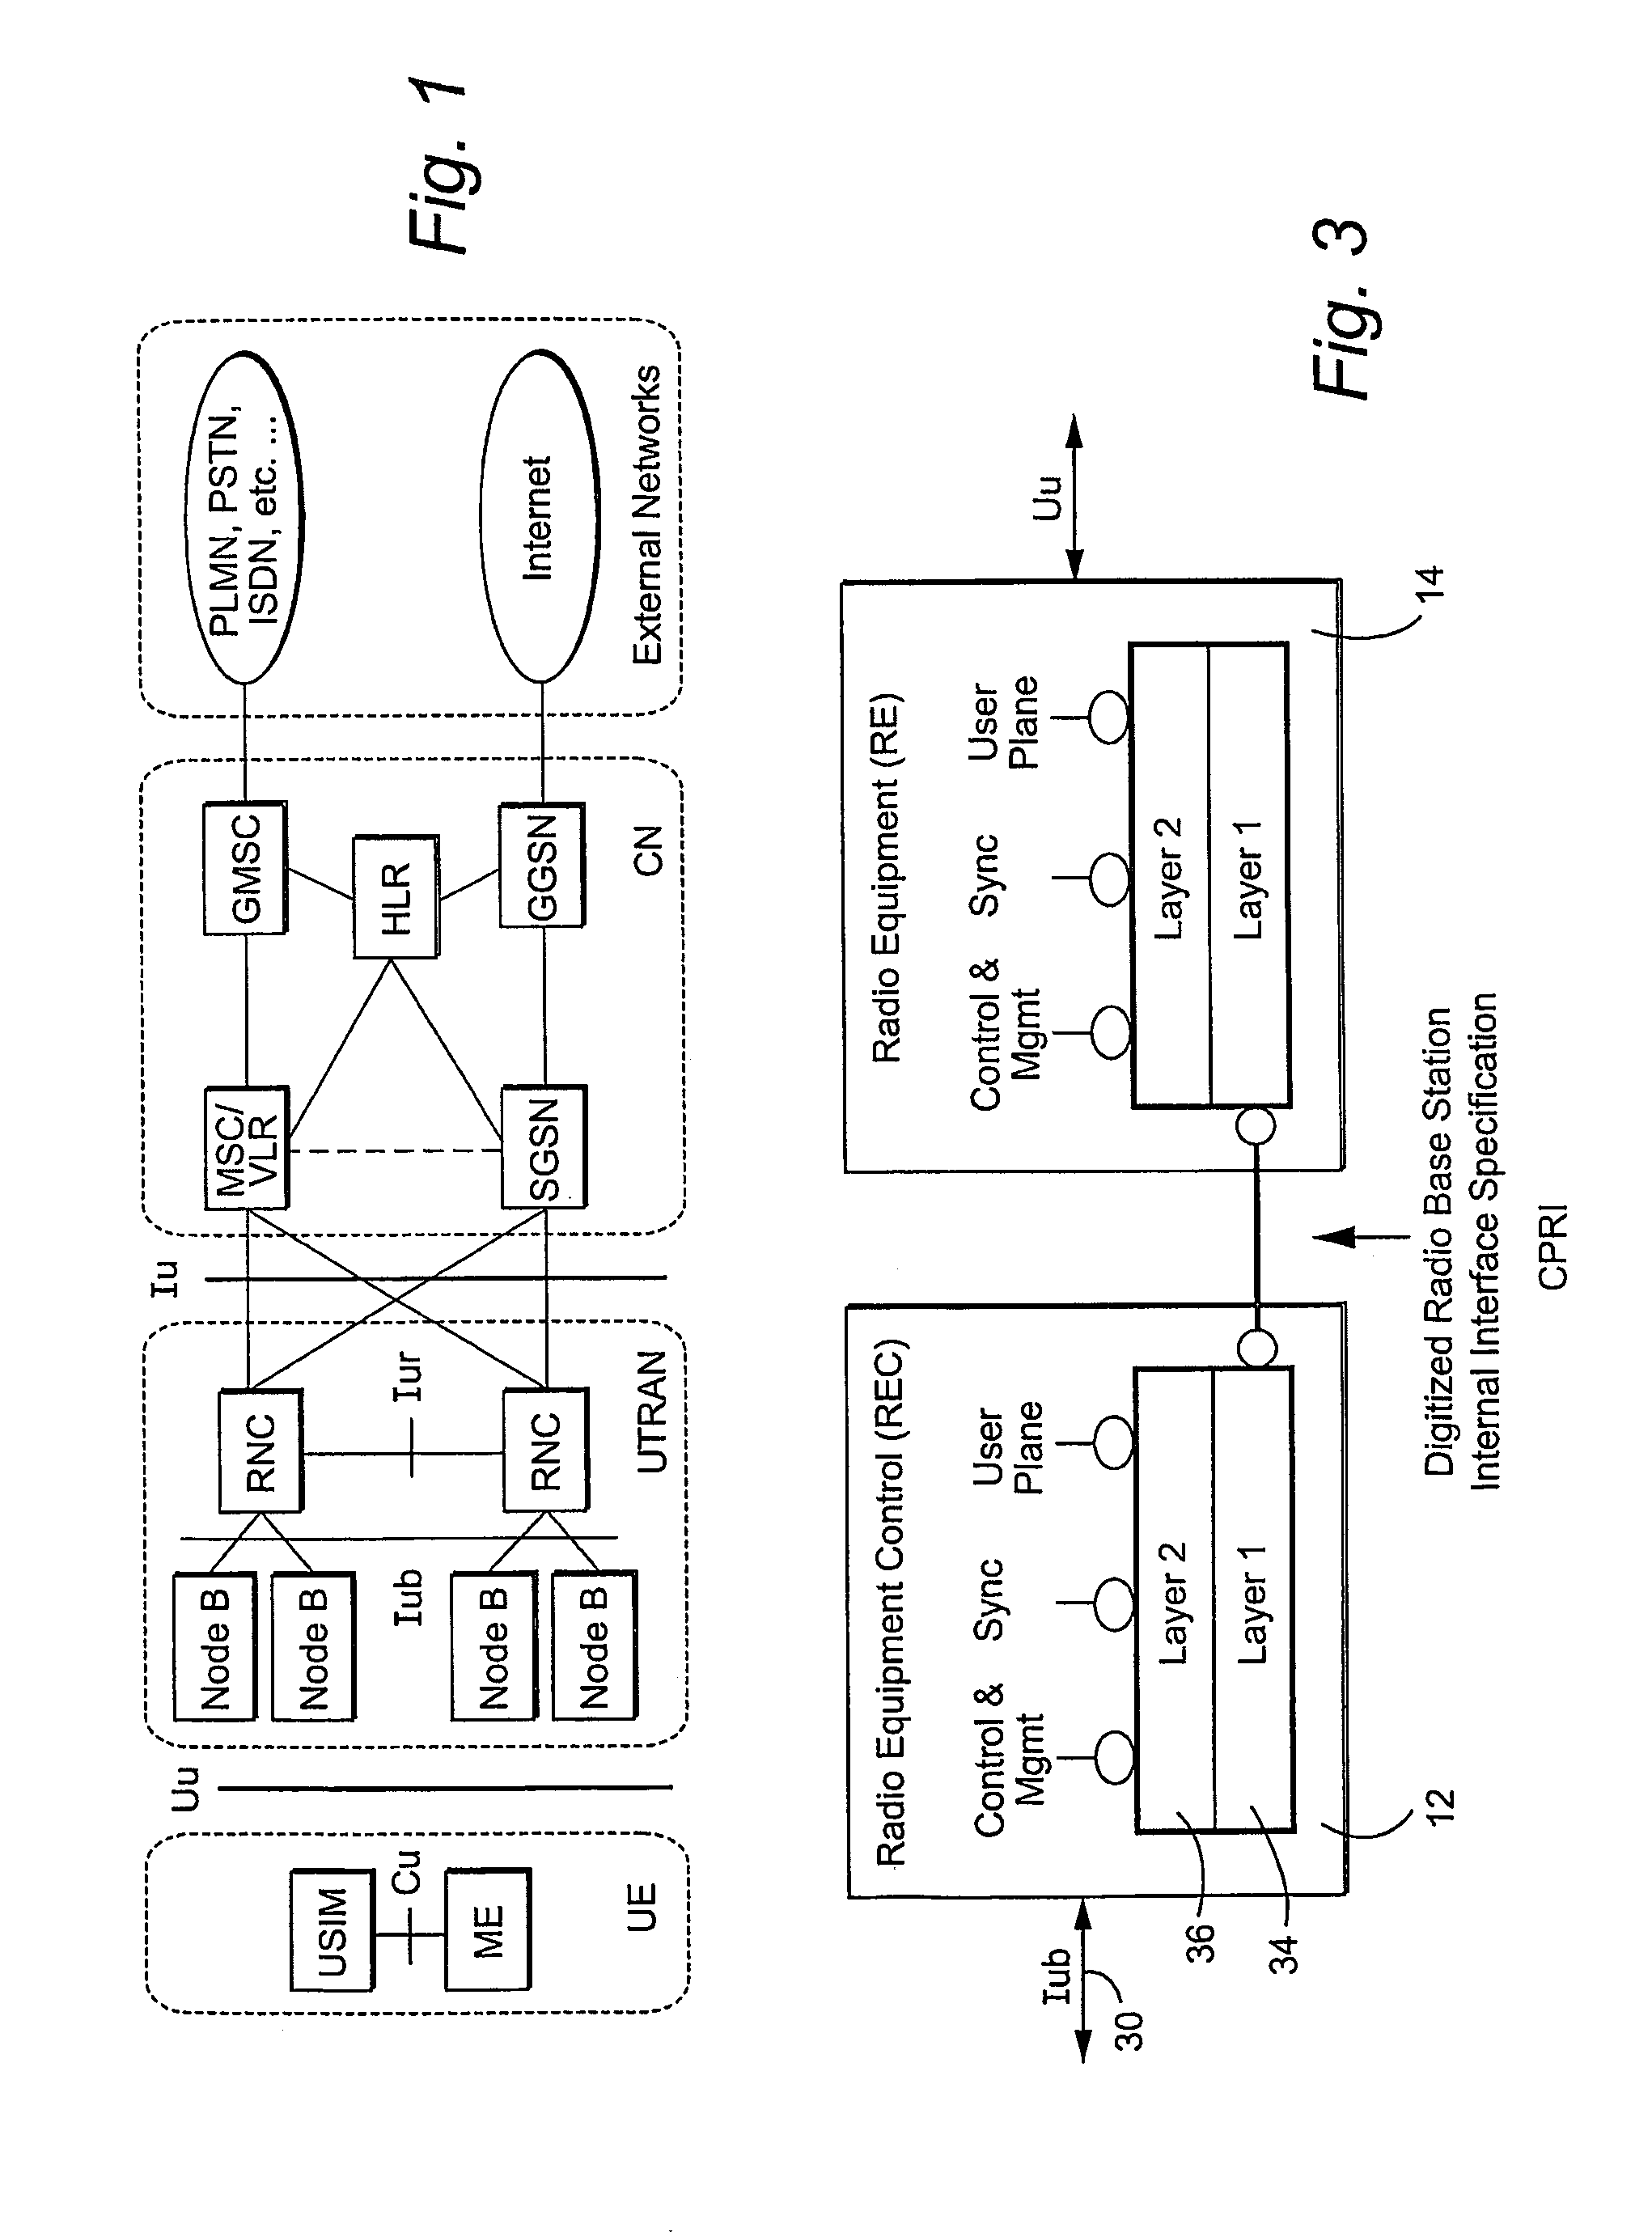 Interface, apparatus, and method for communication between a radio equipment control node and one or more remote radio equipment nodes